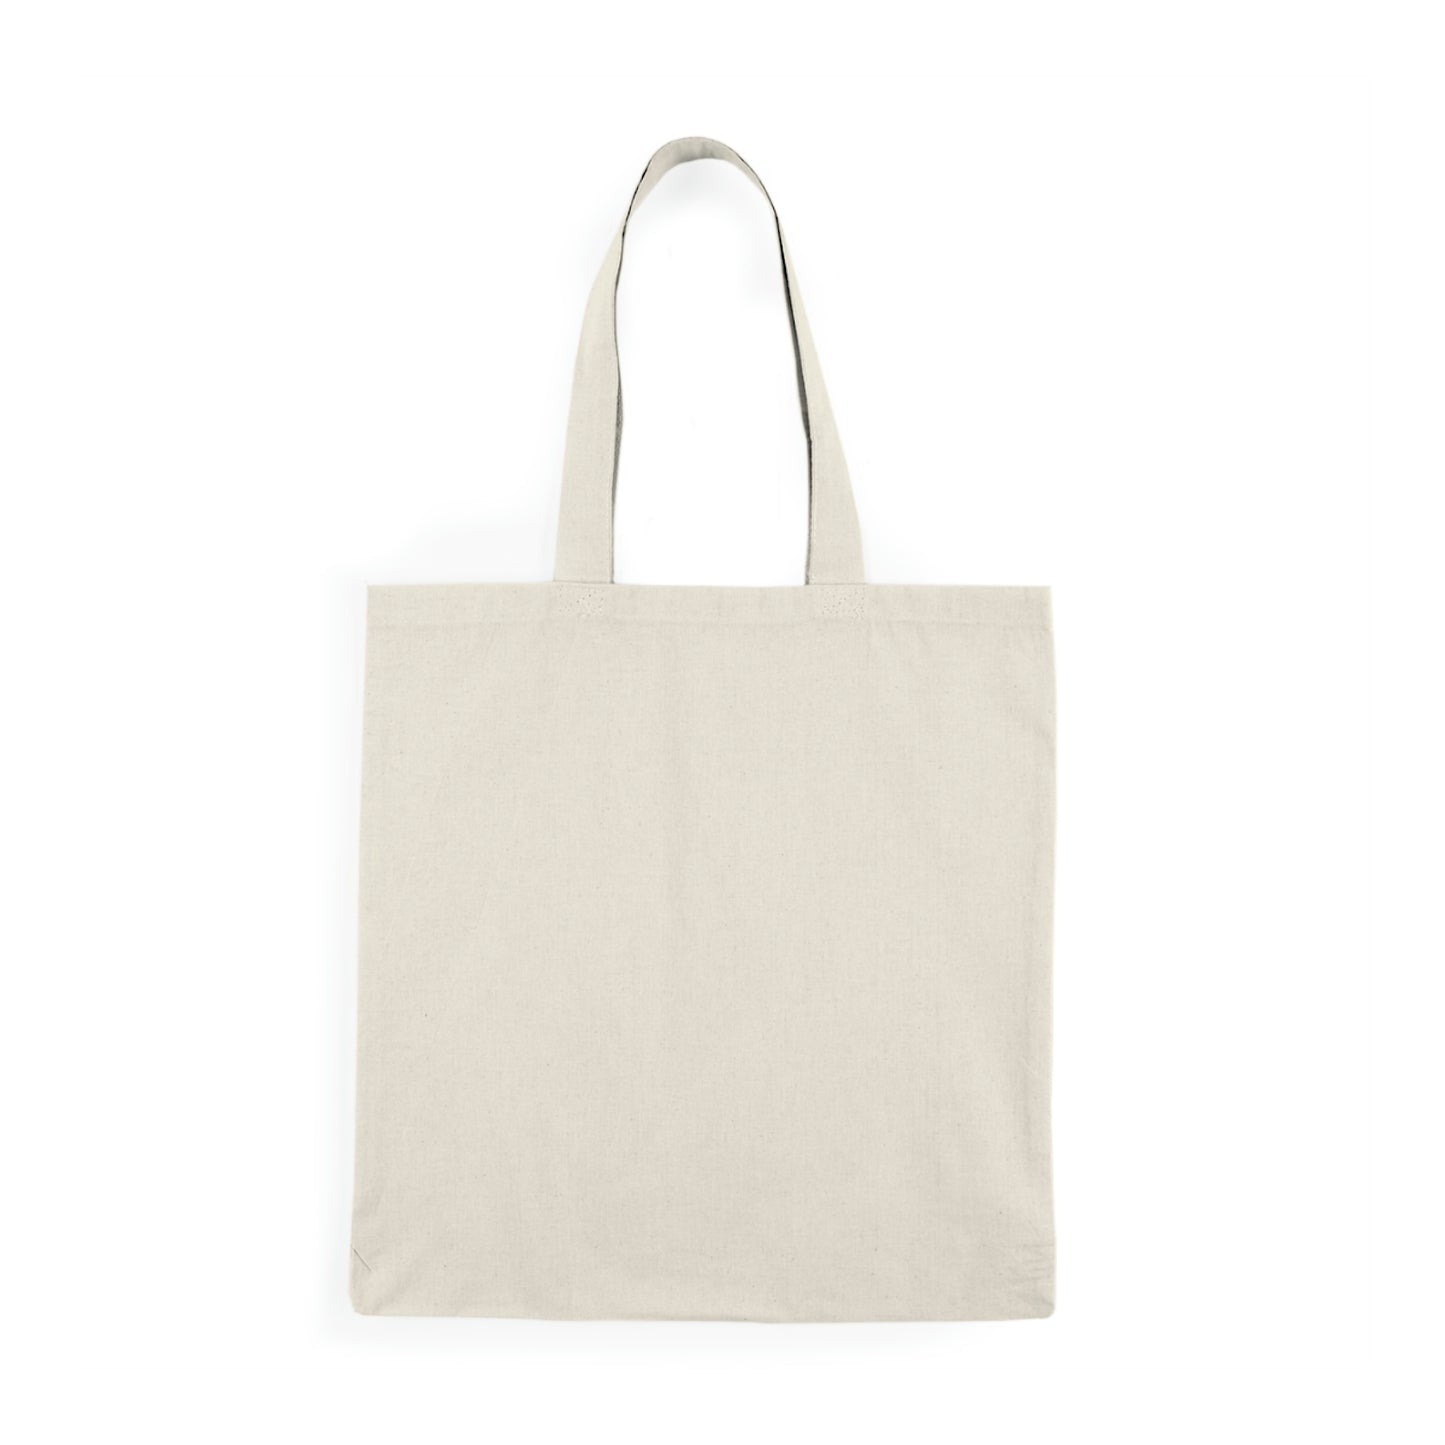 One Small Victory - Natural Tote Bag